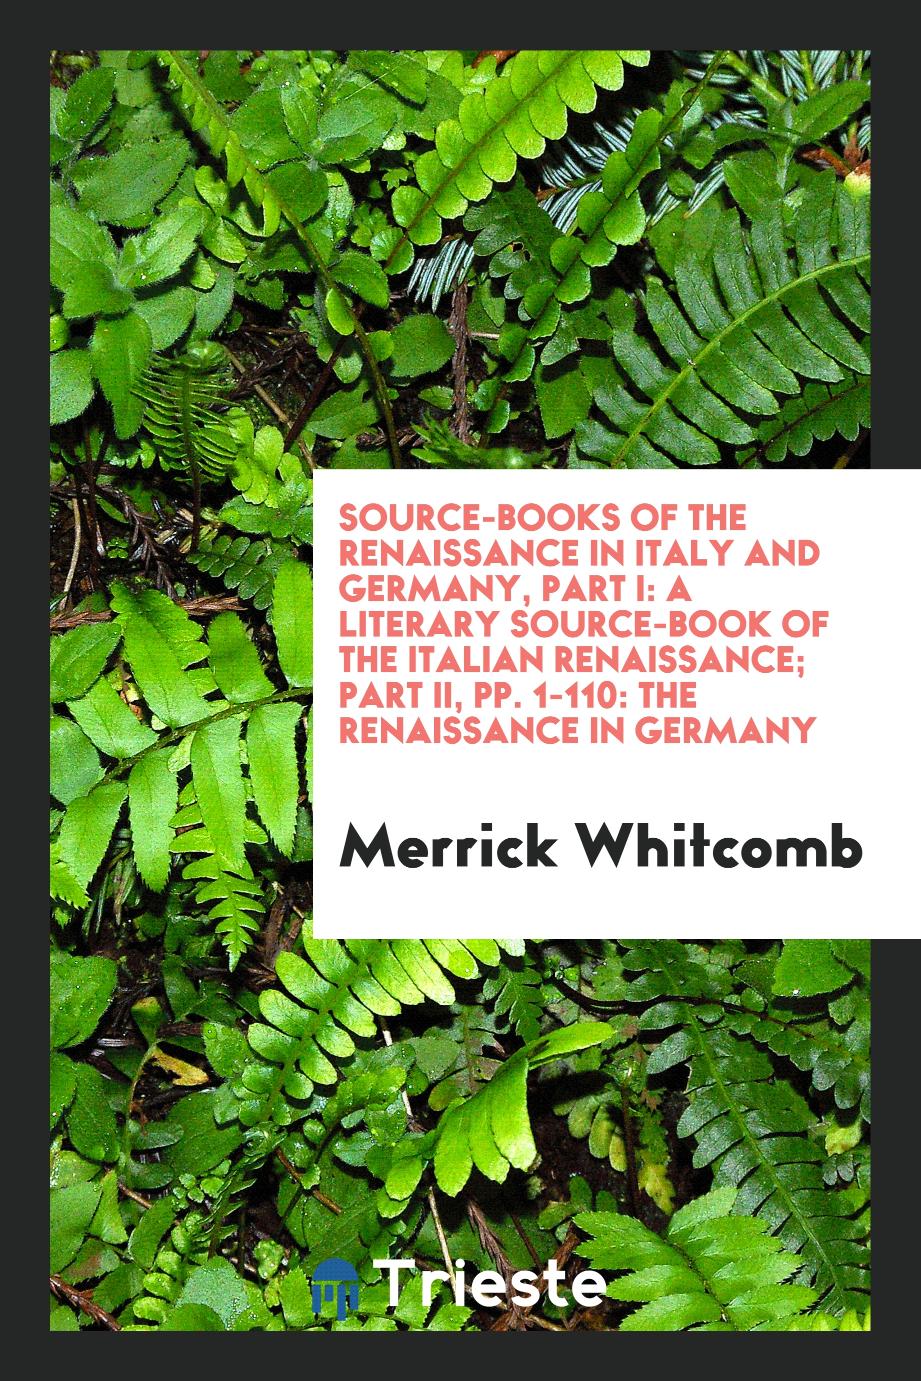 Source-Books of the Renaissance in Italy and Germany, Part I: A Literary Source-Book of the Italian Renaissance; Part II, pp. 1-110: The Renaissance in Germany